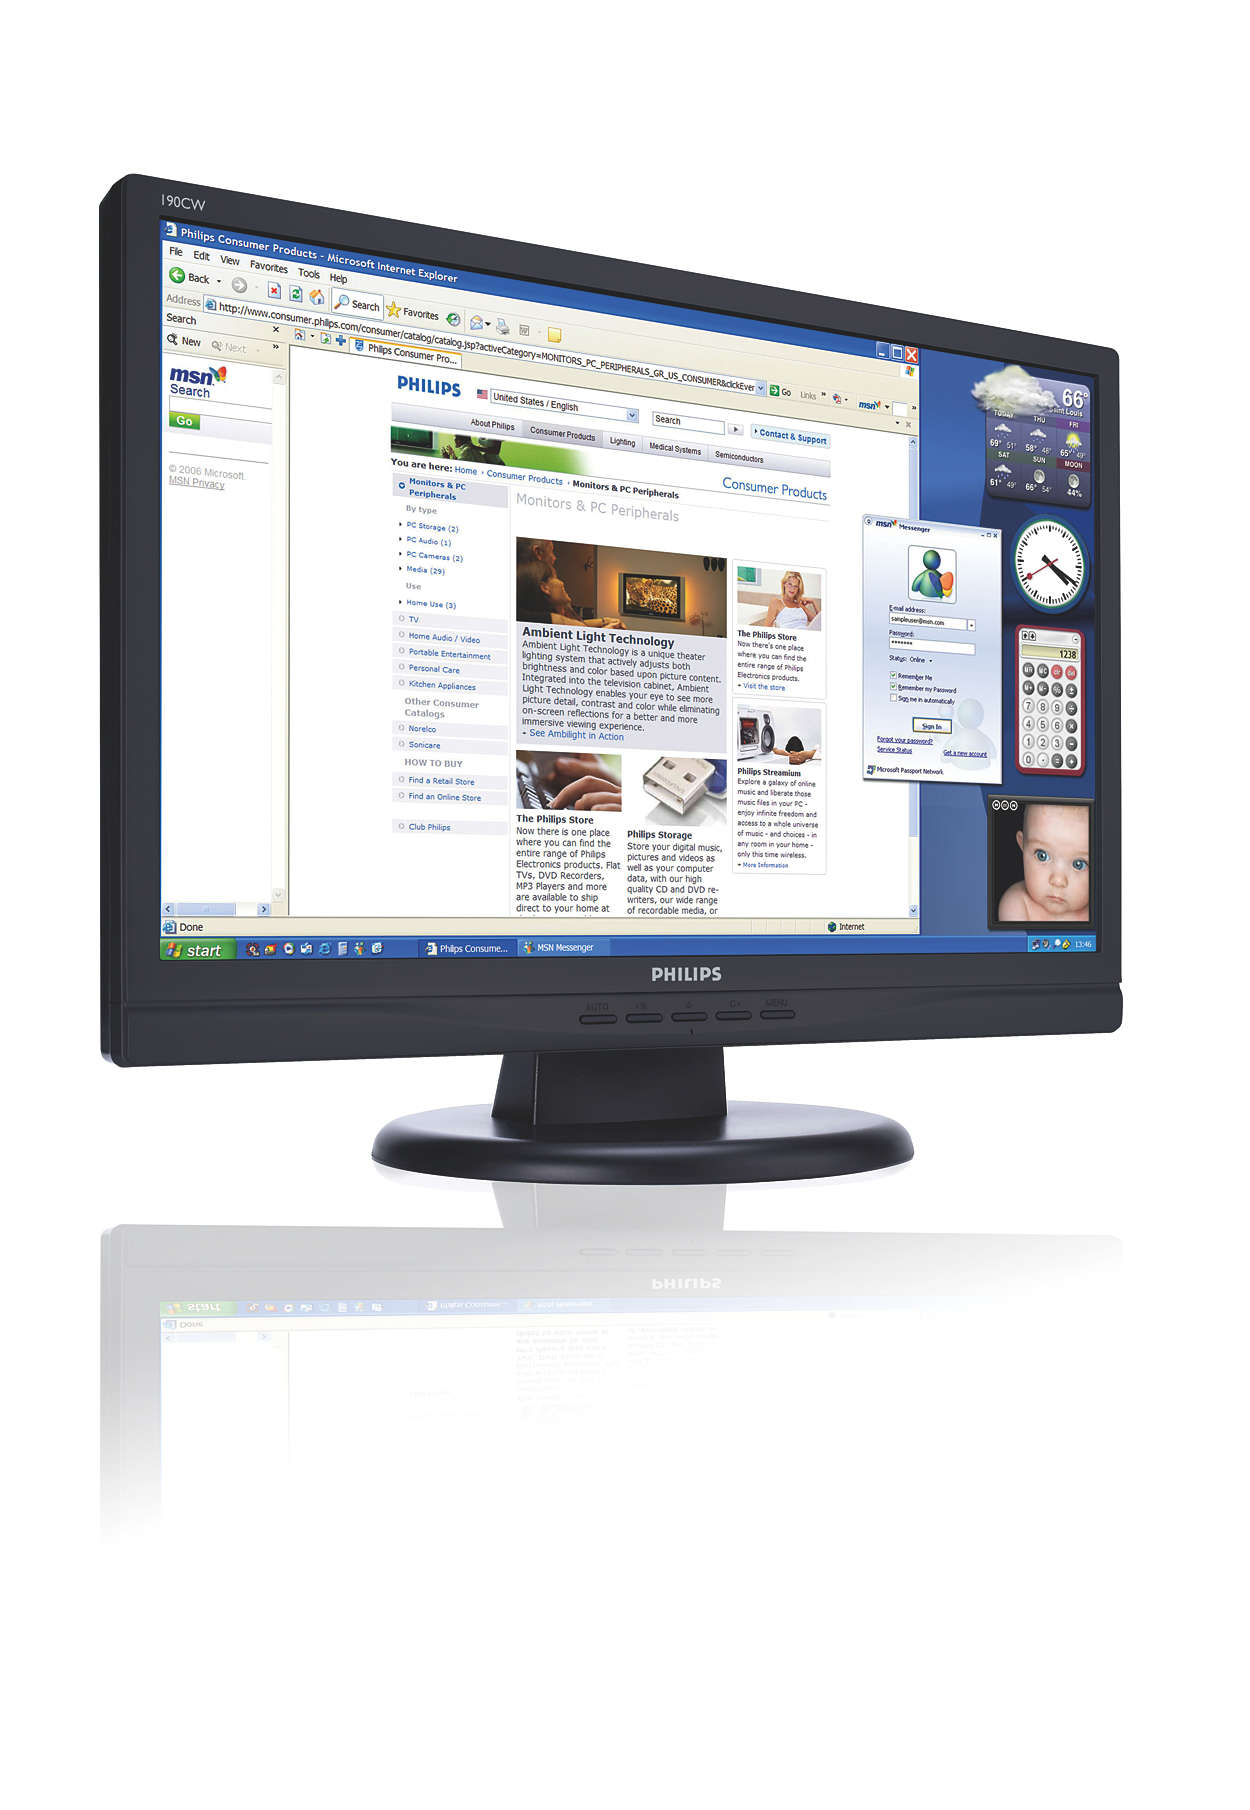 Best value for money widescreen LCD monitor